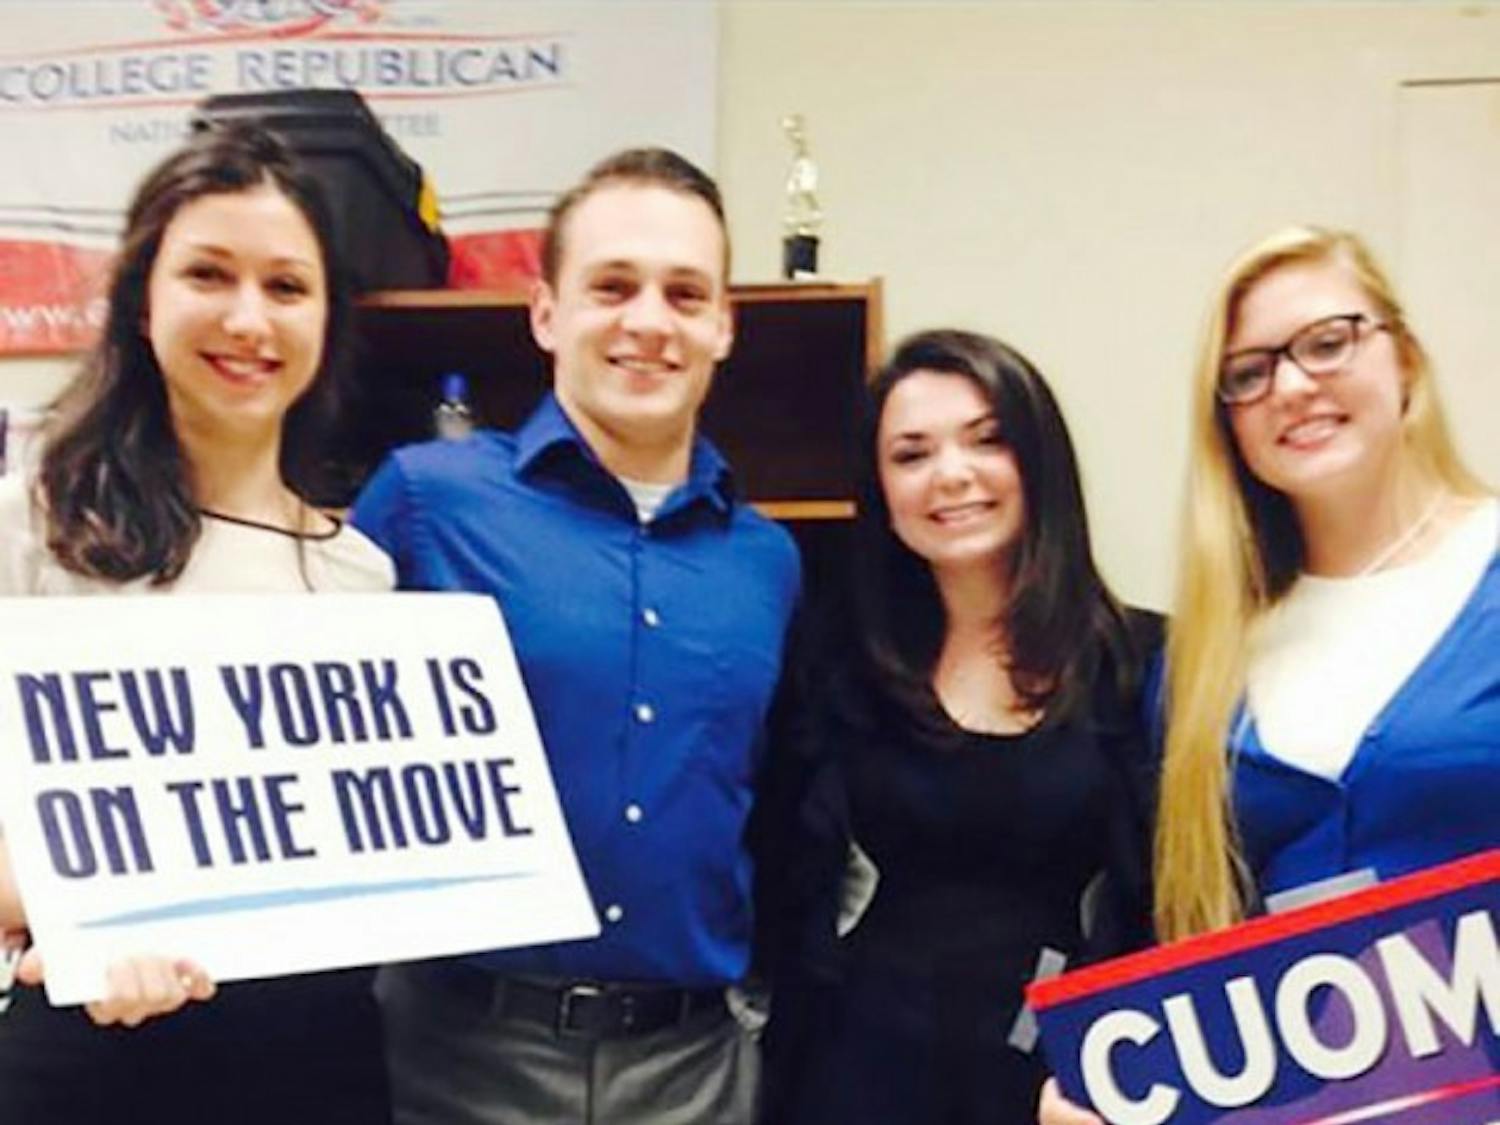 Laura Mannara (far left), president of
College Democrats,&nbsp;went with other members
in her club (Sean Kaczmarek, Melissa Kathan,&nbsp;
and Carly Gottorff) to watch the gubernatorial
debate watch party for Gov. Andrew
Cuomo.&nbsp;Curtosy of Laura Mannara